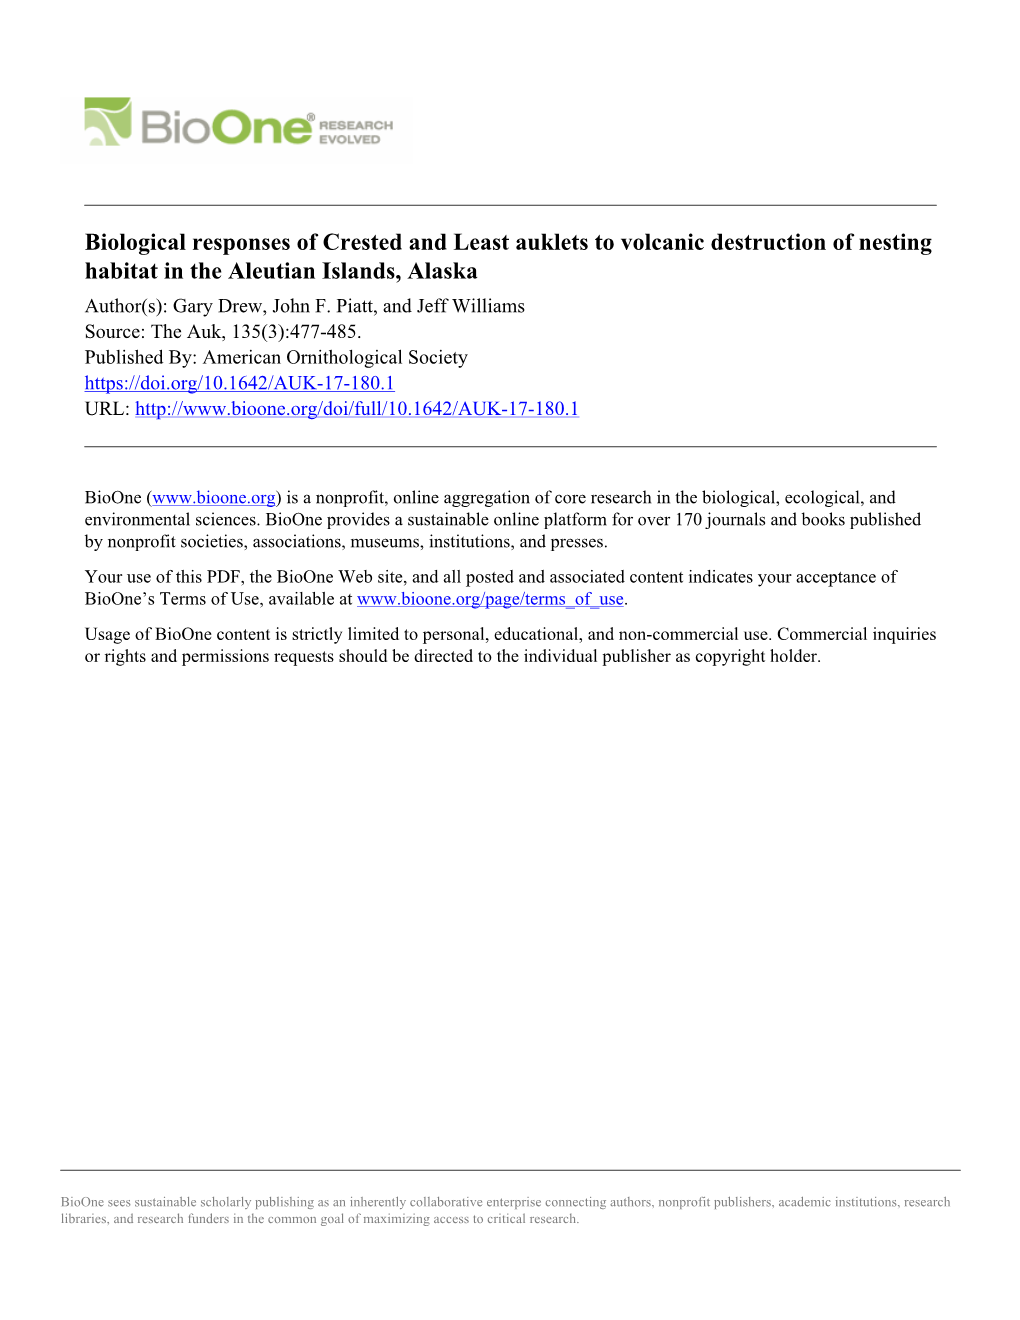 Biological Responses of Crested and Least Auklets to Volcanic Destruction of Nesting Habitat in the Aleutian Islands, Alaska Author(S): Gary Drew, John F